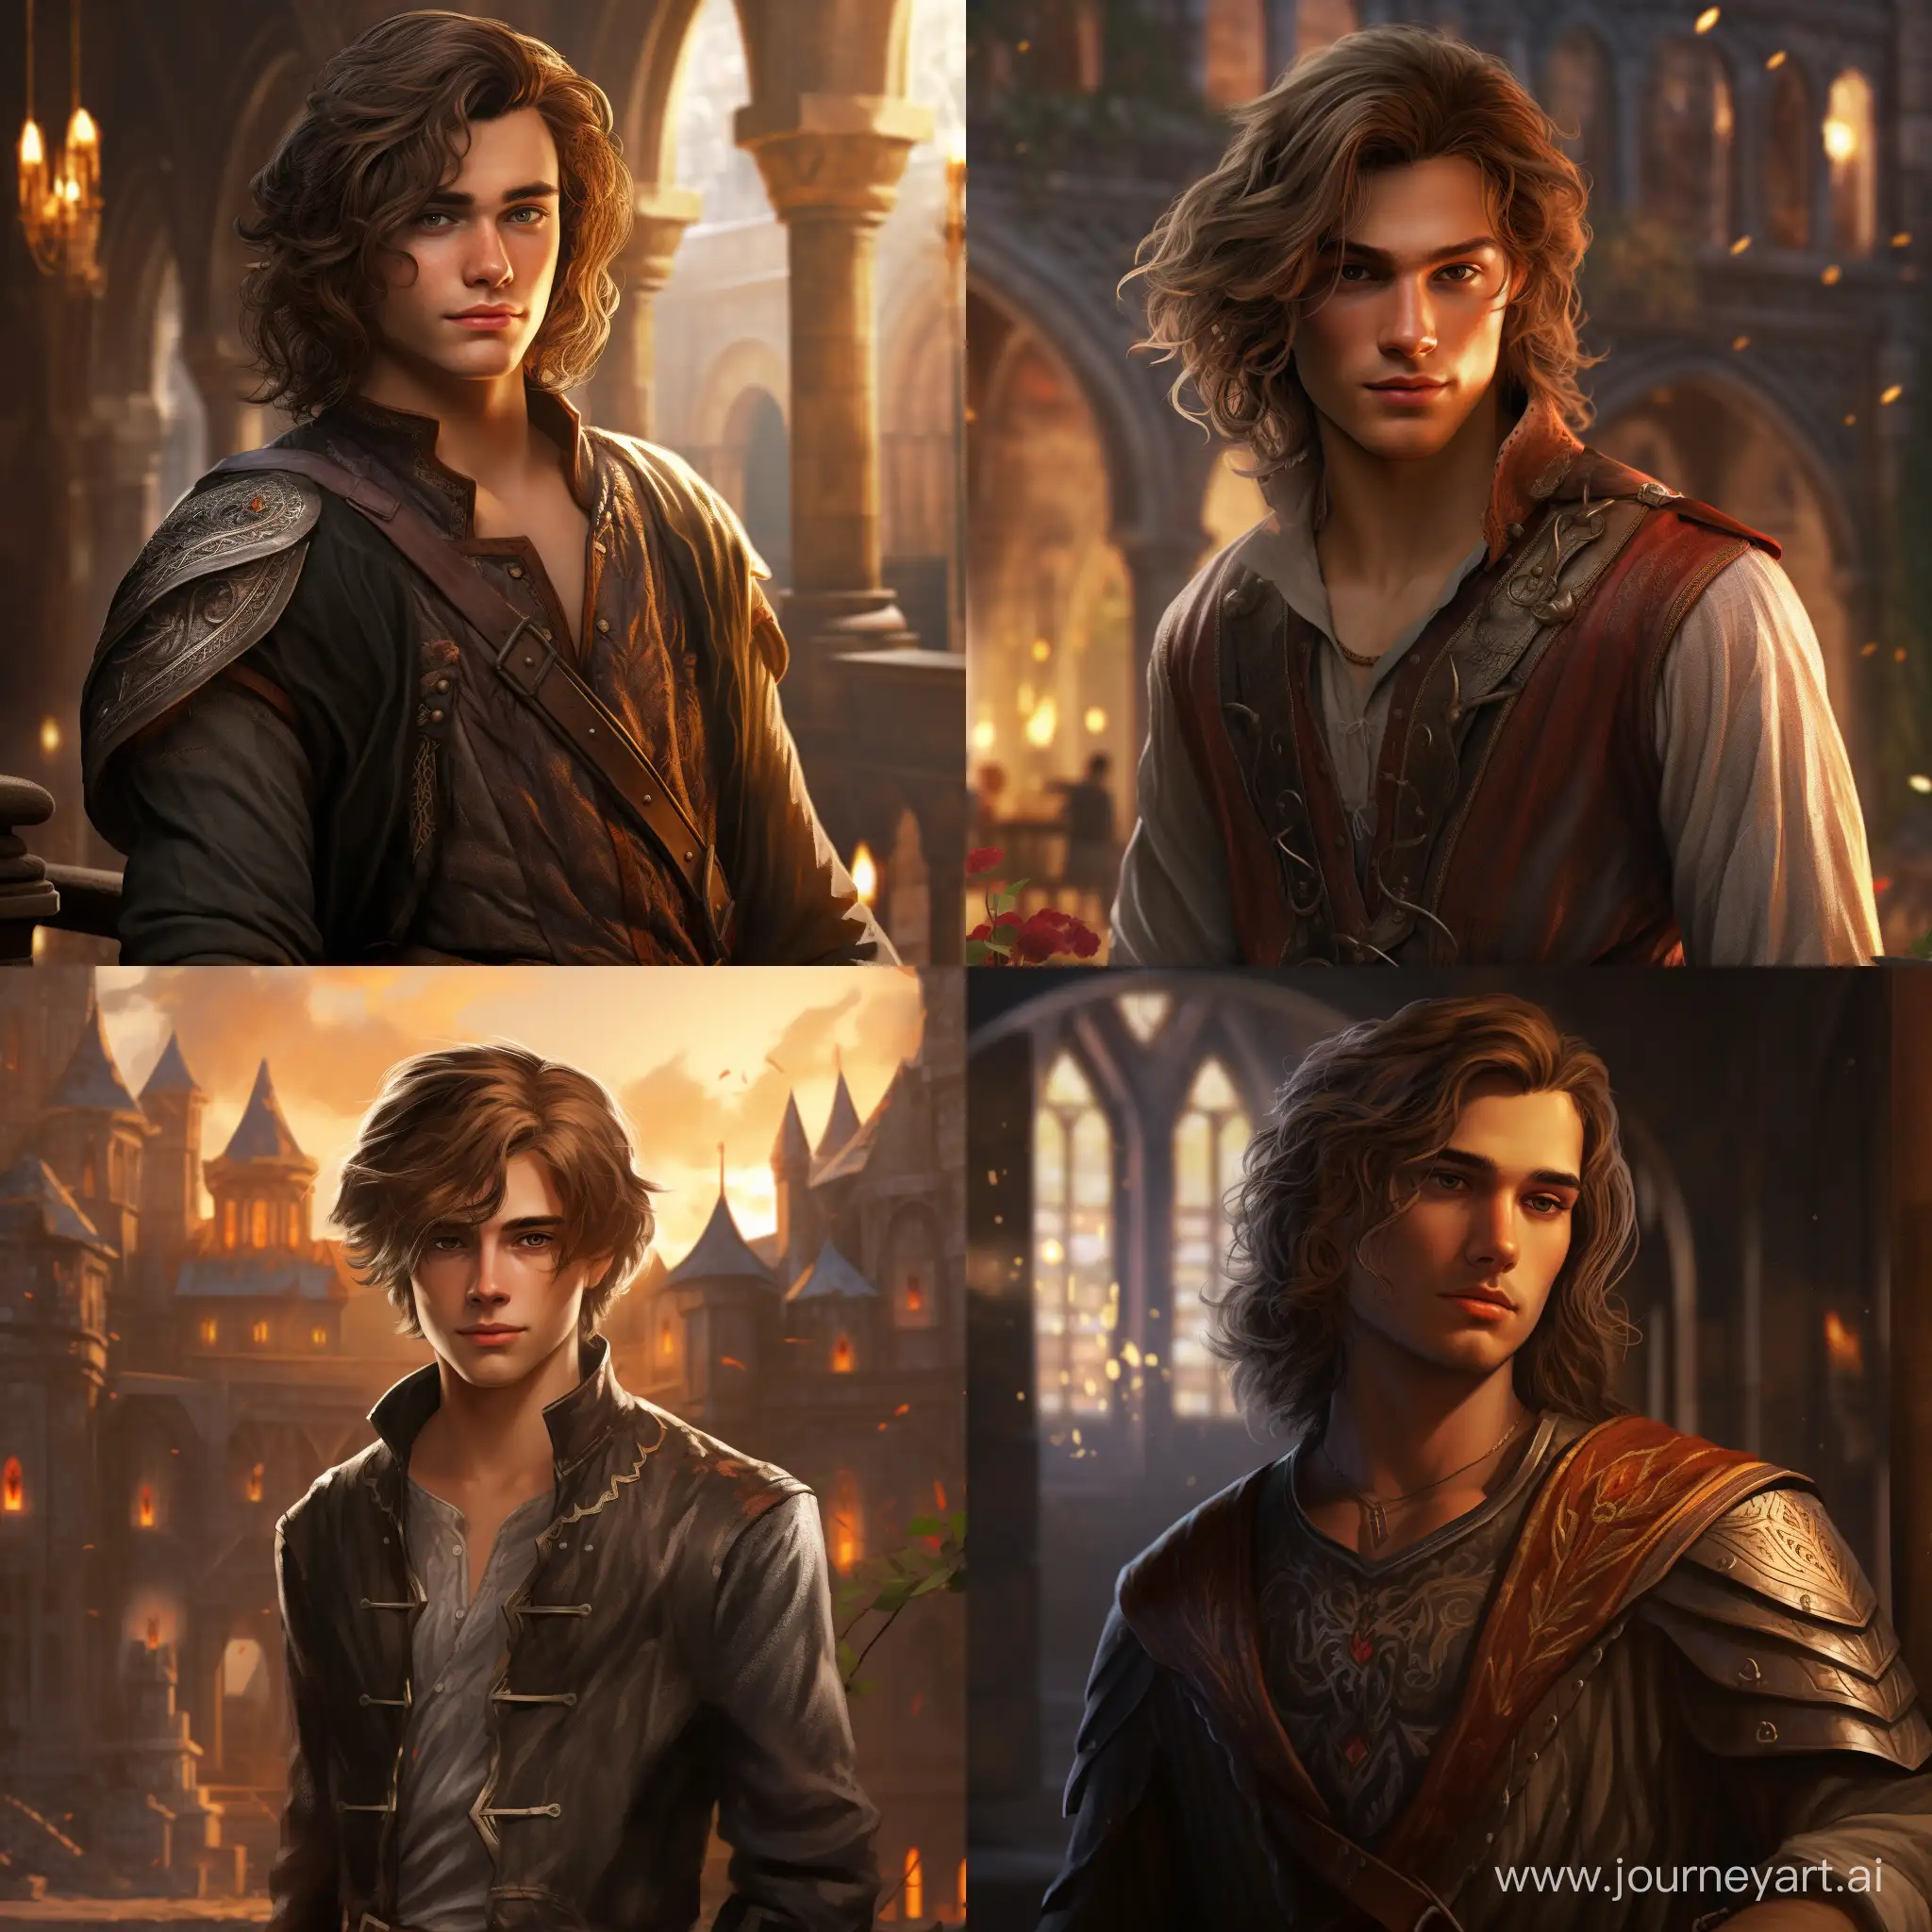 Young-Viceroy-Son-with-Crystal-Emission-in-Fantasy-Medieval-City